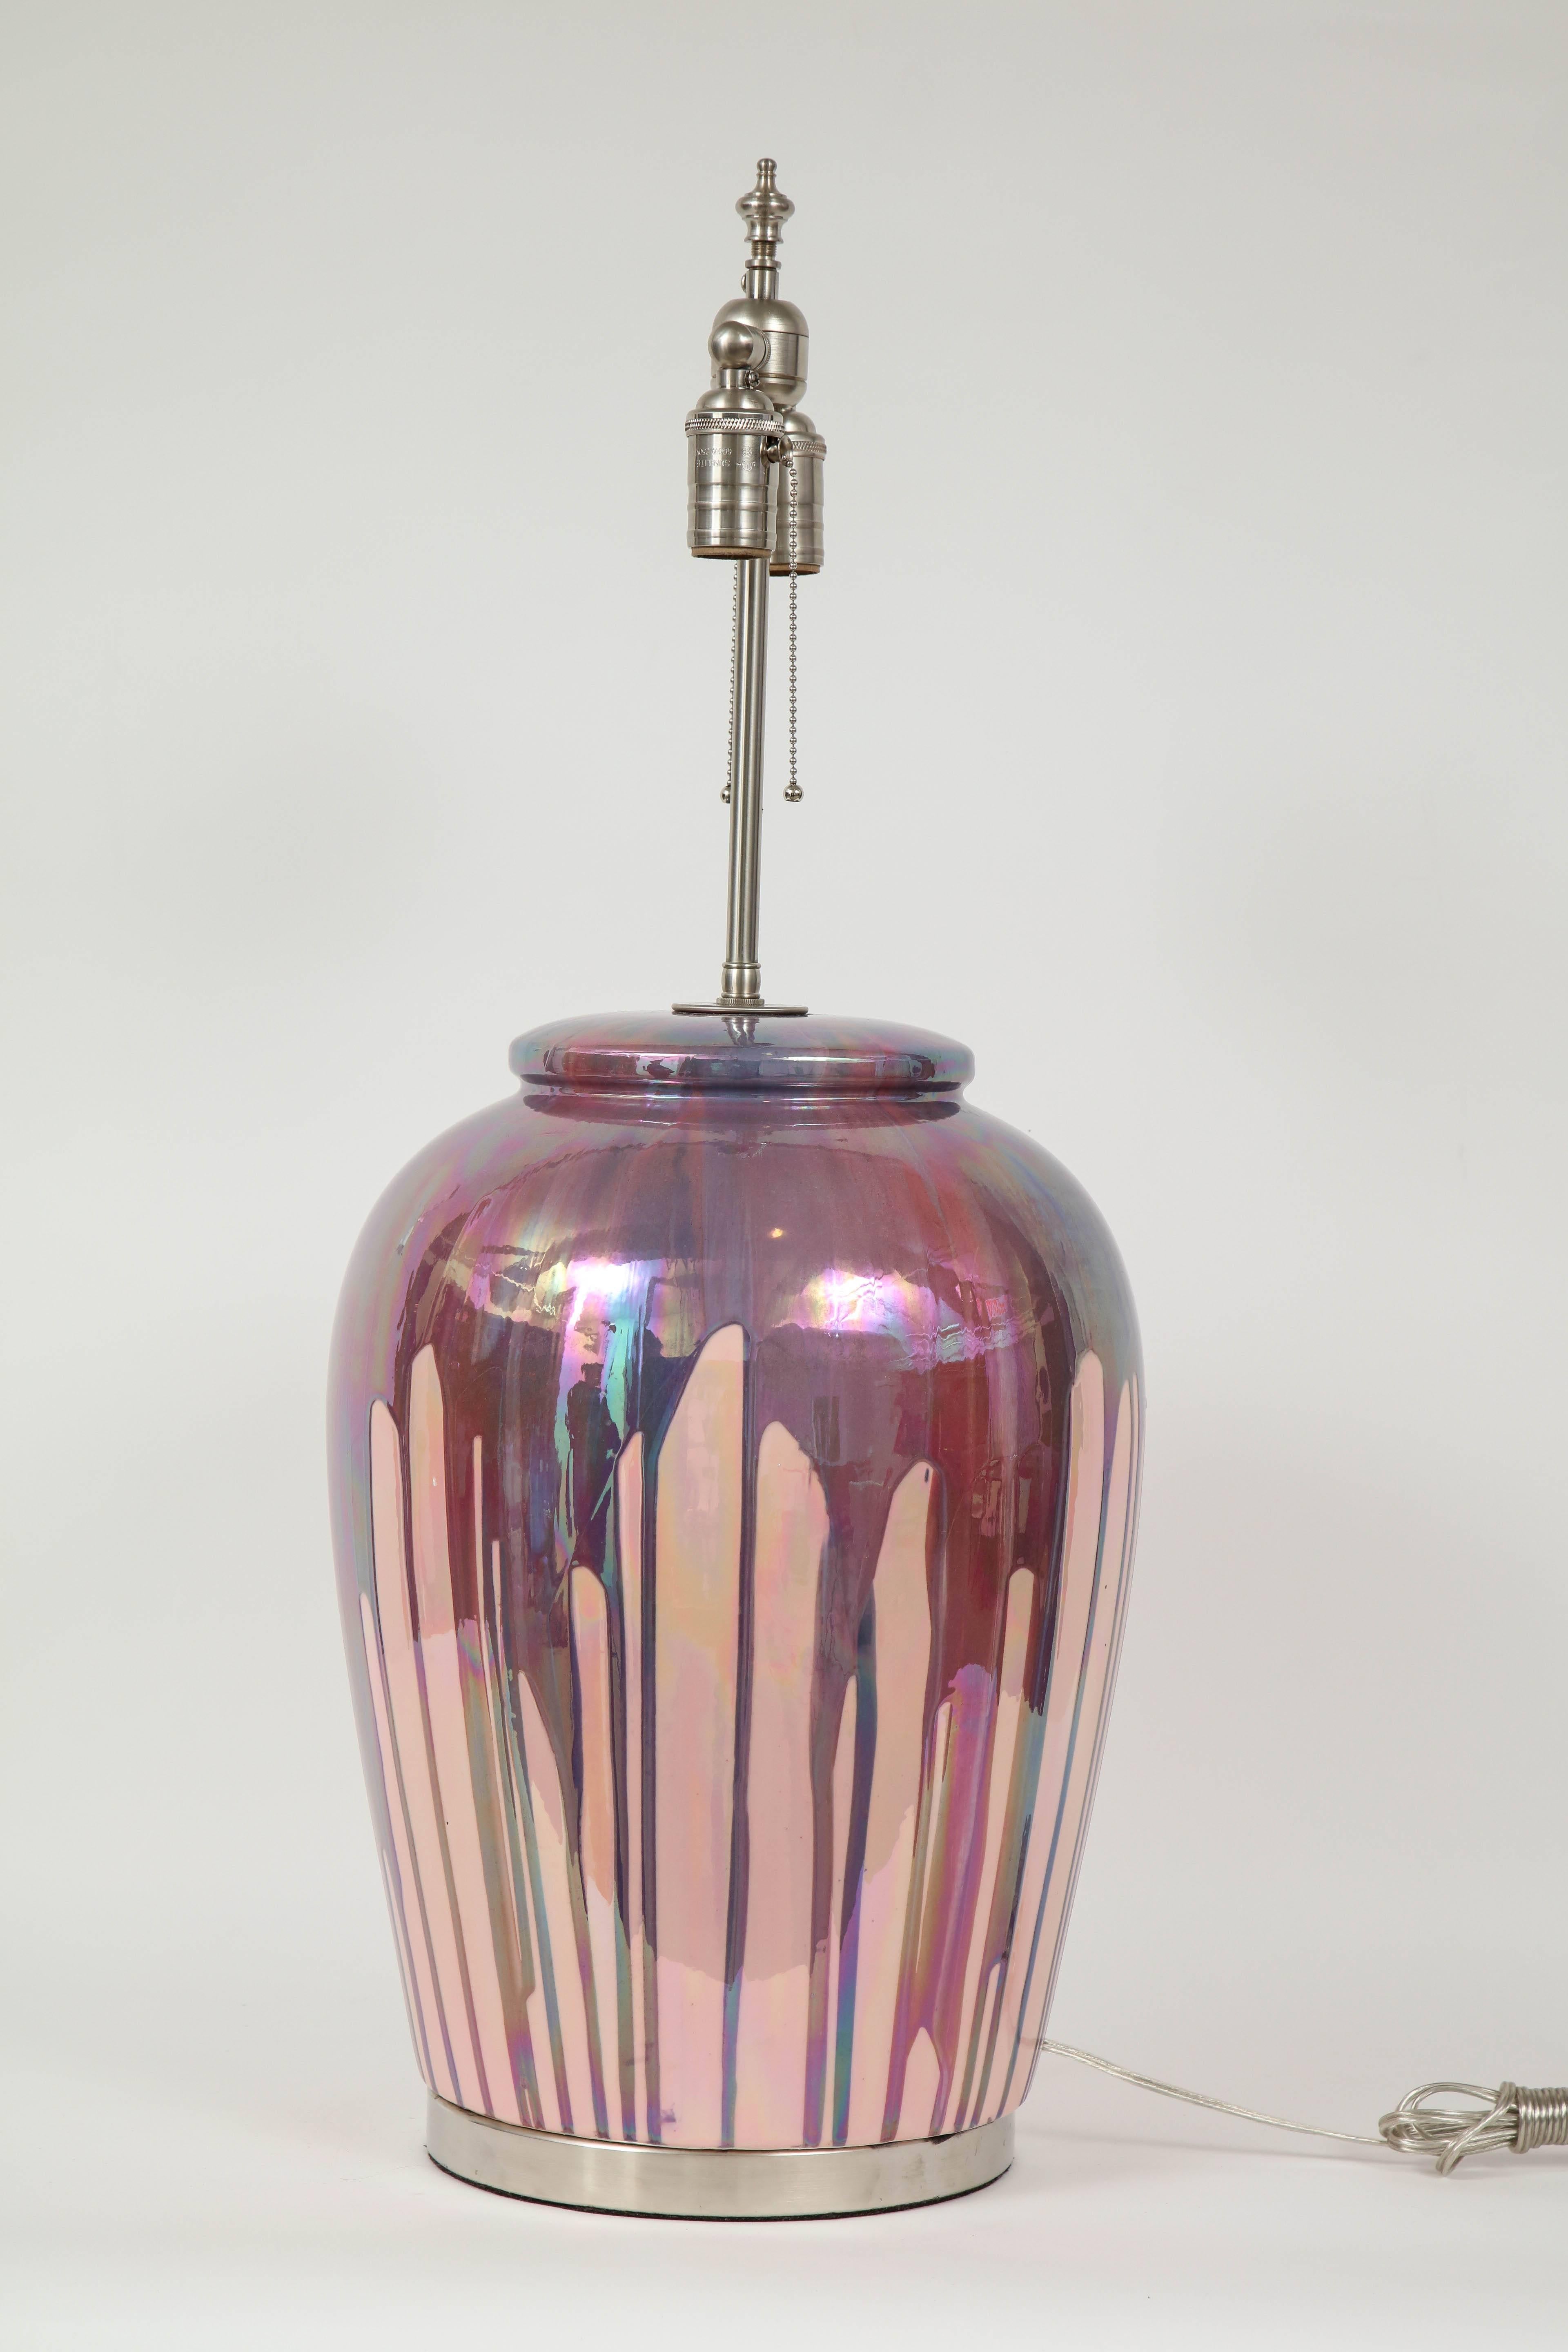 Large-scale mesmerizing midcentury Italian porcelain ceramic glazed lamps in a blush or rose color and iridescent purple or raspberry drip overglaze sitting on satin nickel bases. Rewired for use in the USA with satin nickel cluster sockets.
75W